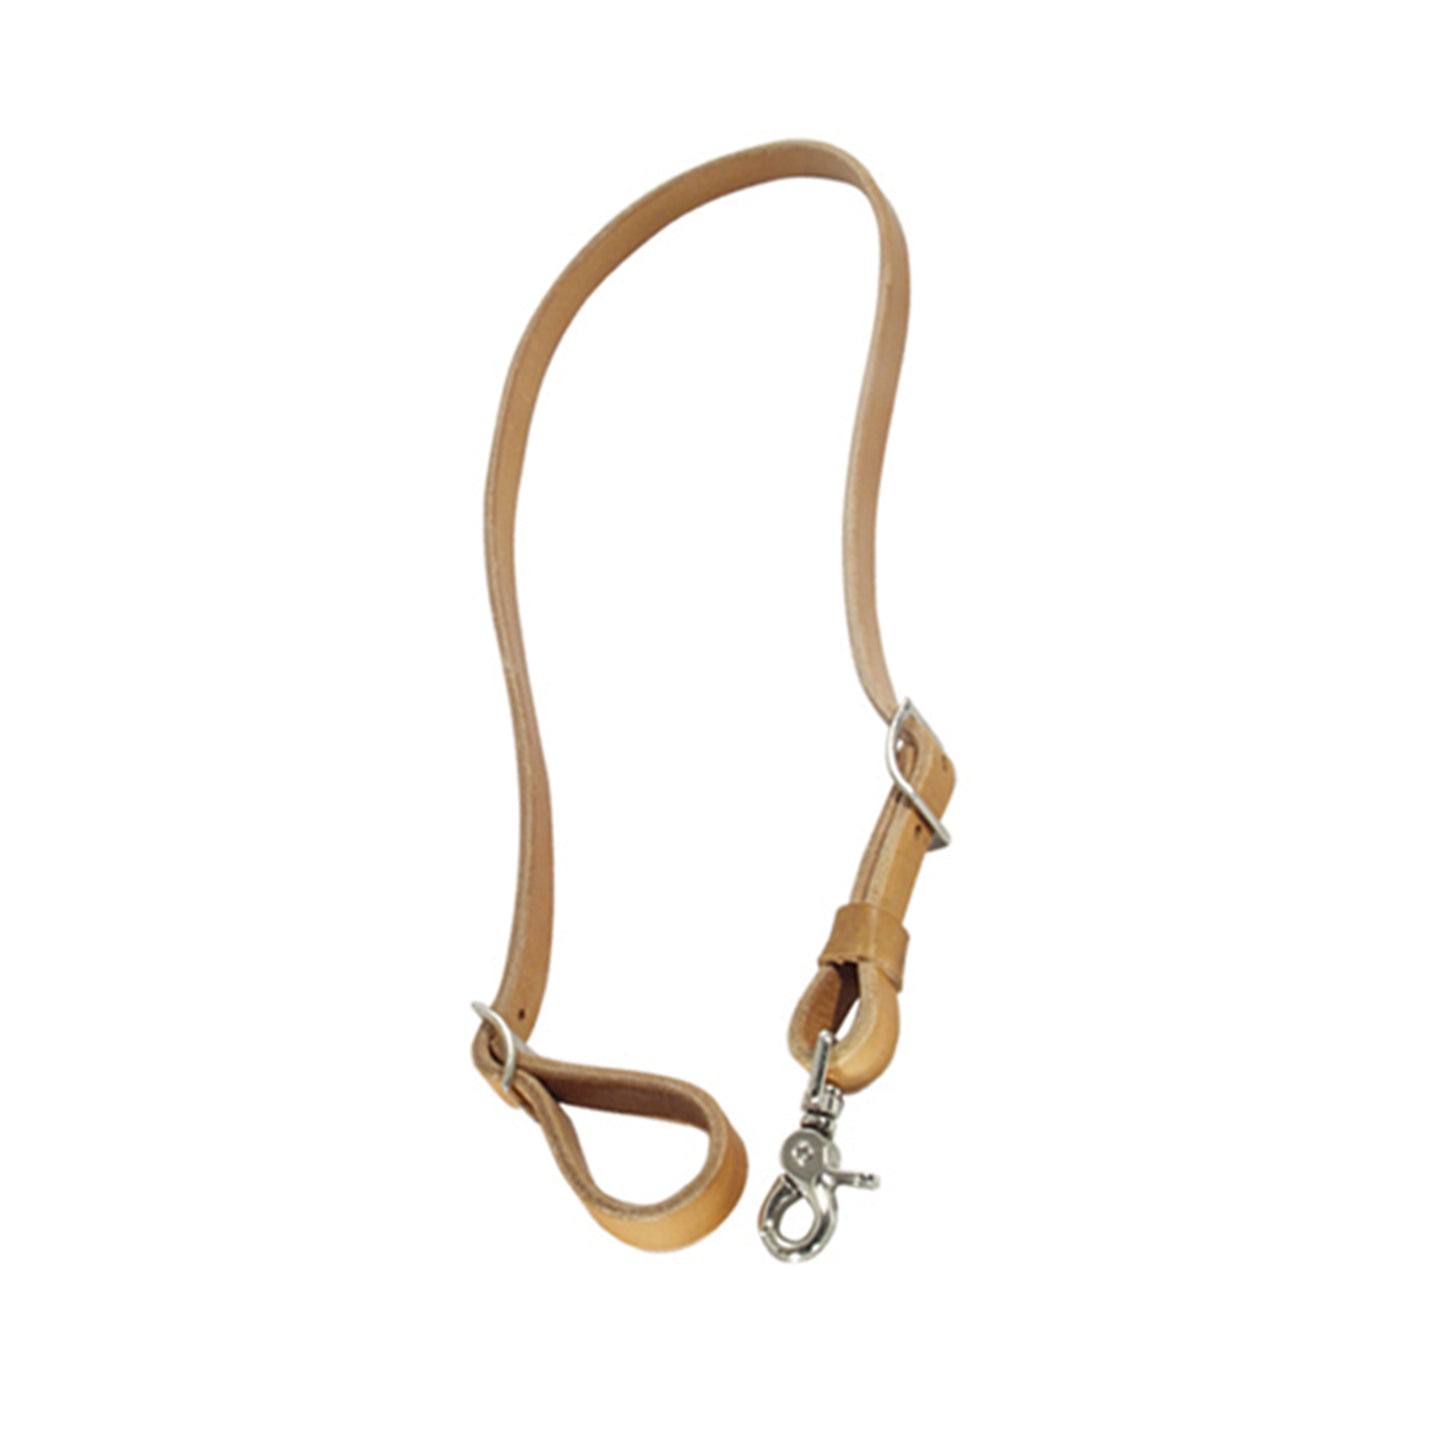 3/4" Tie down harness leather with snap.